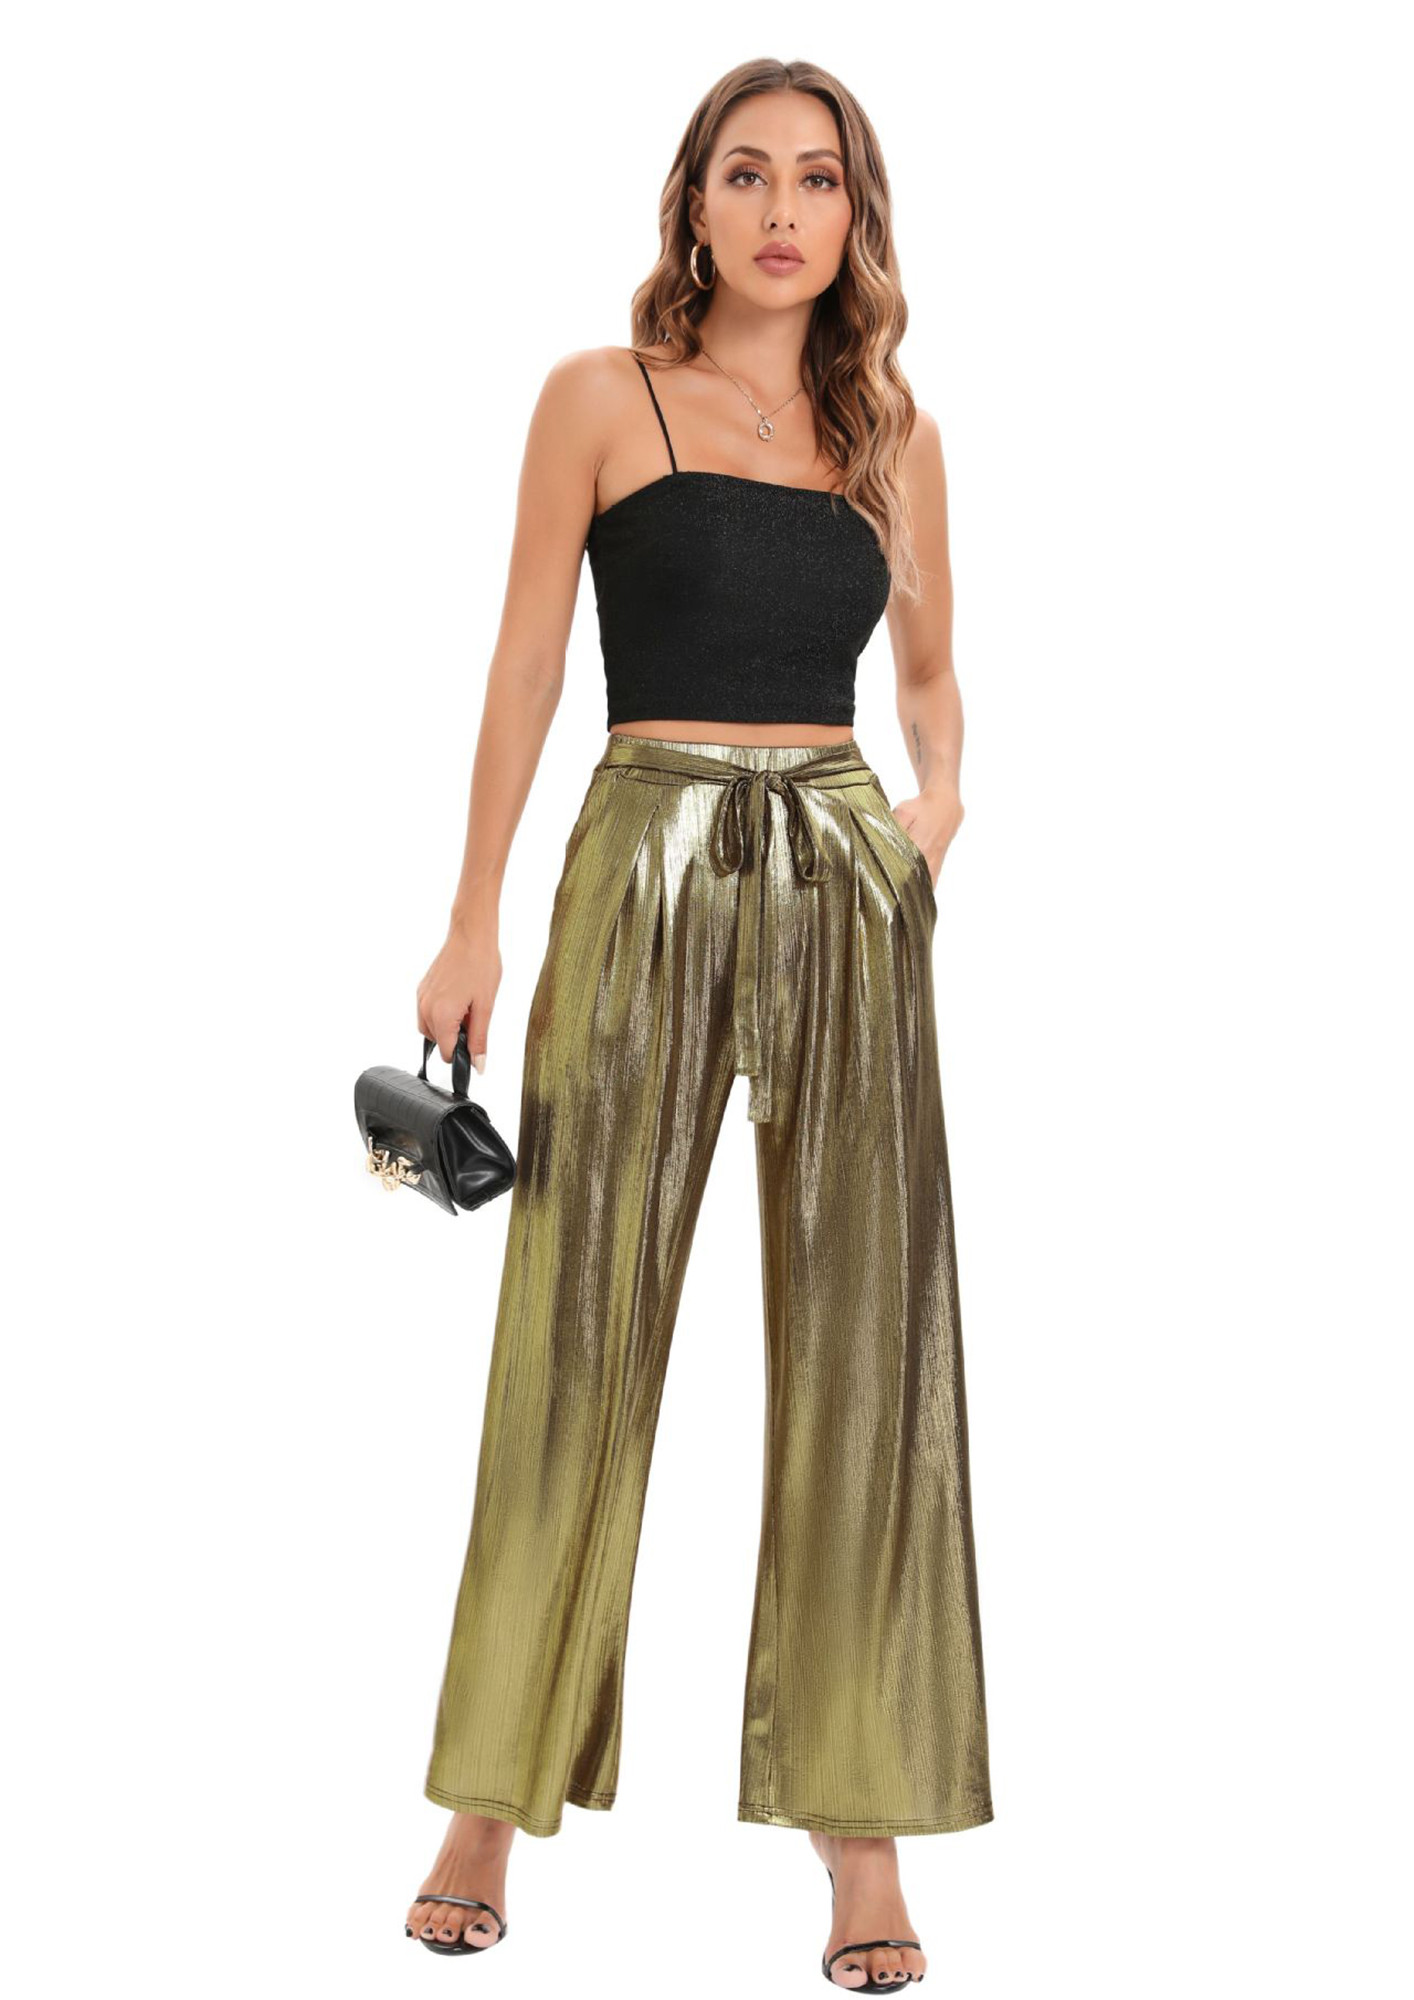 ZARA LIMITED EDITION FLARED SEQUINNED LEGGINGS PANT GOLDEN 3028/020 X SMALL  XS | eBay